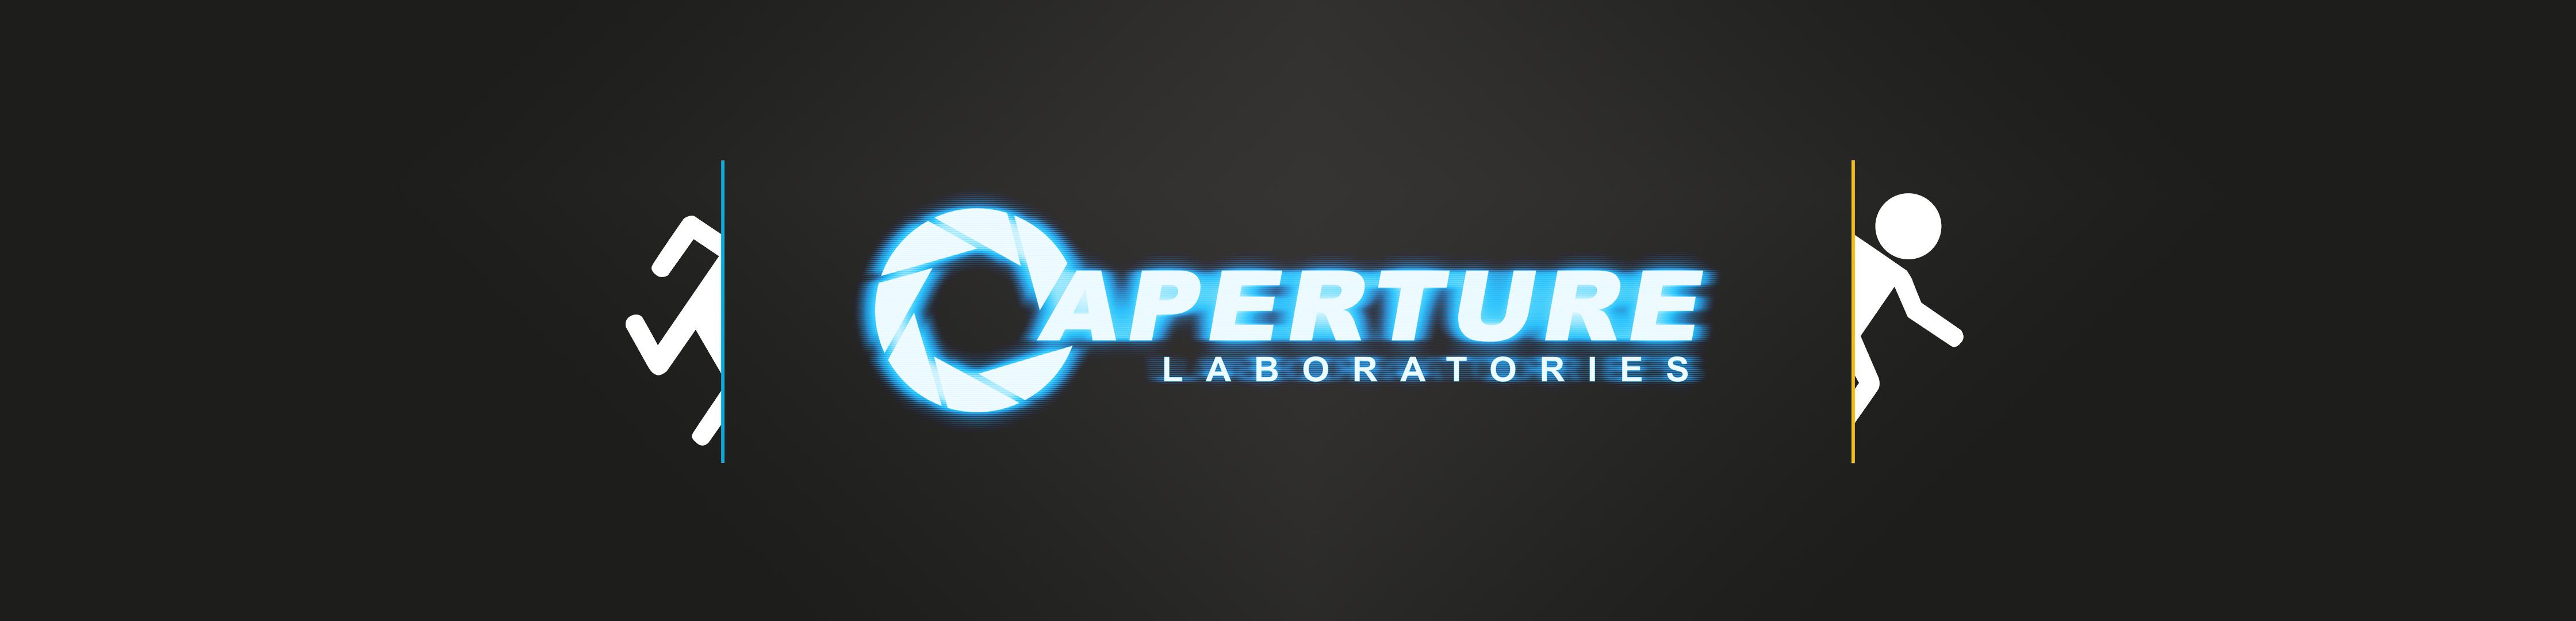 Free Download Edited Some Portal Wallpaper To Fit My 3 Monitors 1280x1024 [ 4480x1080] For Your Desktop, Mobile & Tablet. Explore Wallpaper For 3 Monitors. Multi Monitor Wallpaper, 5760 X 1080